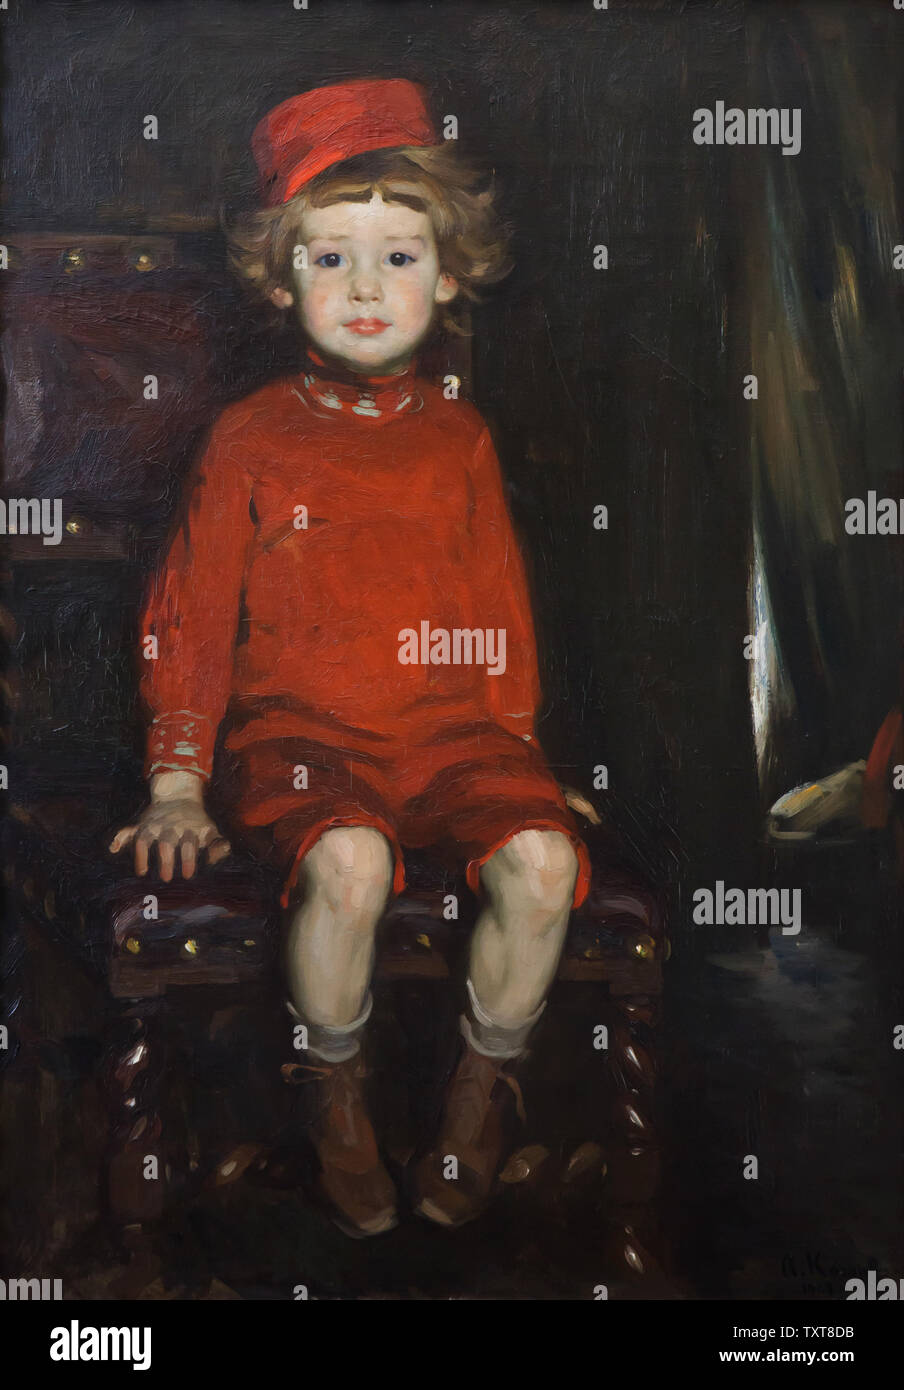 Painting 'Boy in Red' by German Impressionist painter Arthur Kampf (1907) on display in the Alte Nationalgalerie (Old National Gallery) in Berlin, Germany. Stock Photo